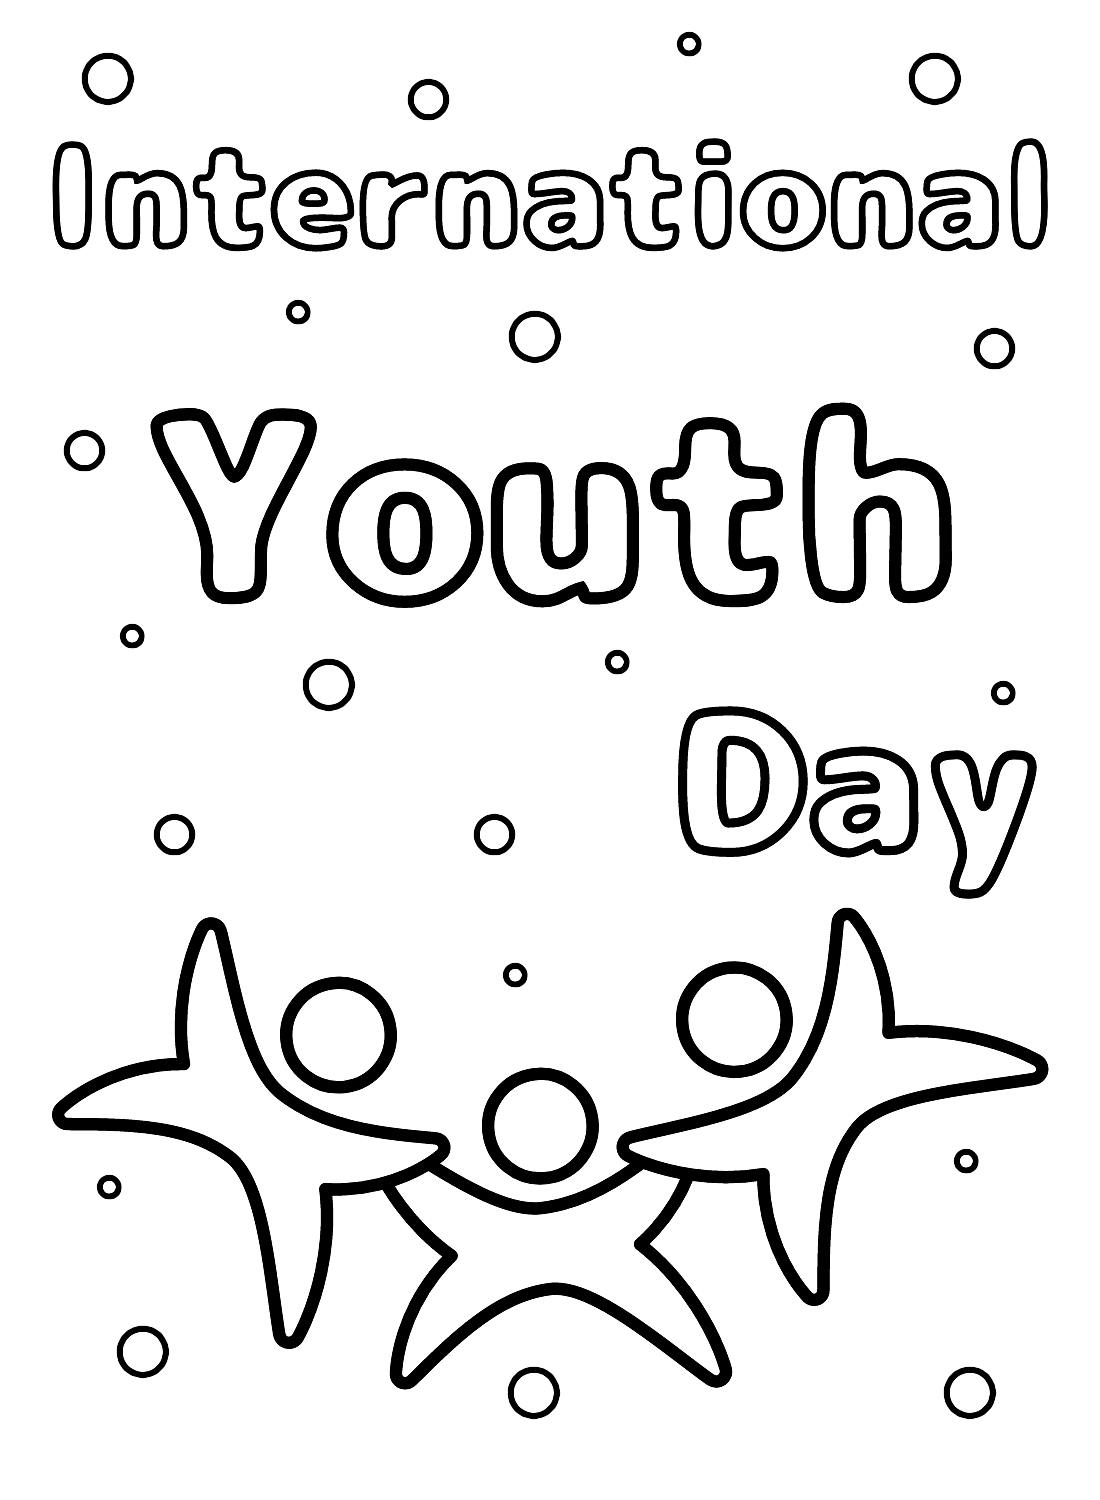 Coloring Page International Youth Day from International Youth Day